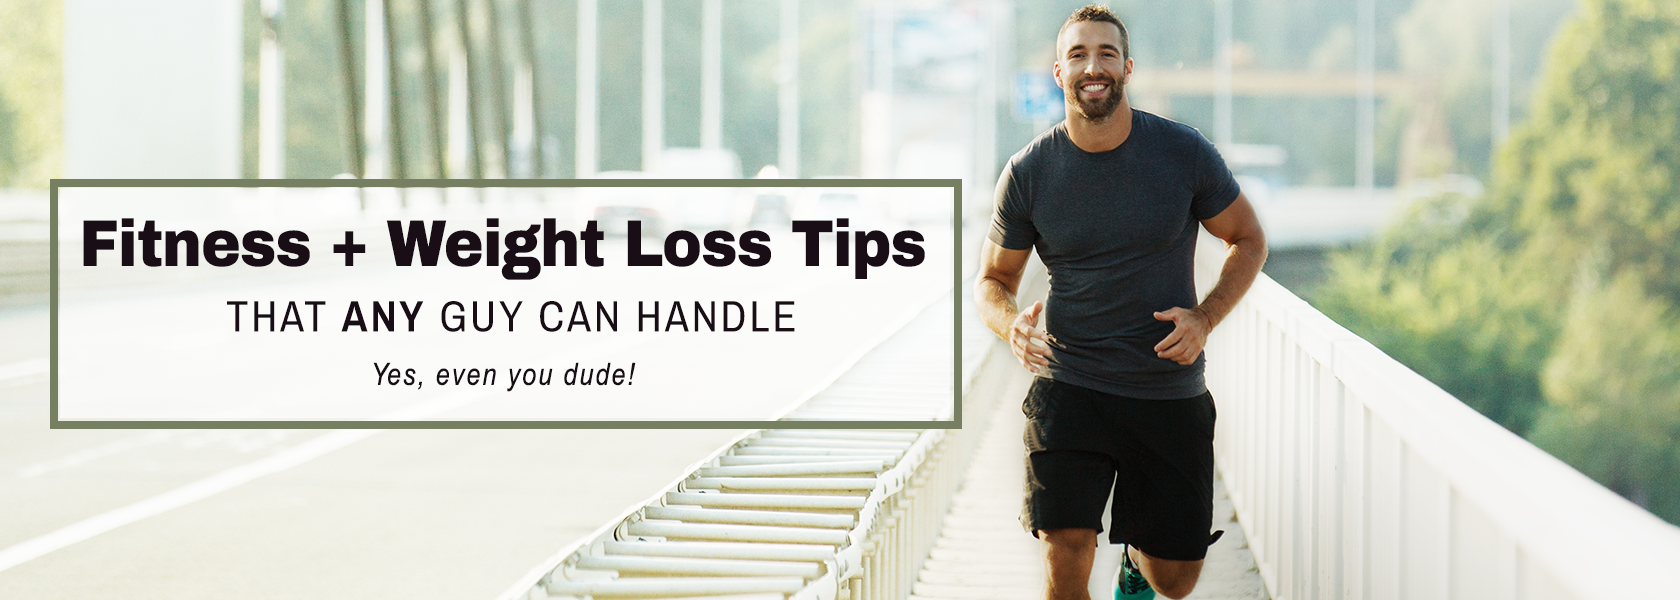 Joe running. Text Fittness + Weight Loss Tipps that any guy can handle. Yes, even you dude.